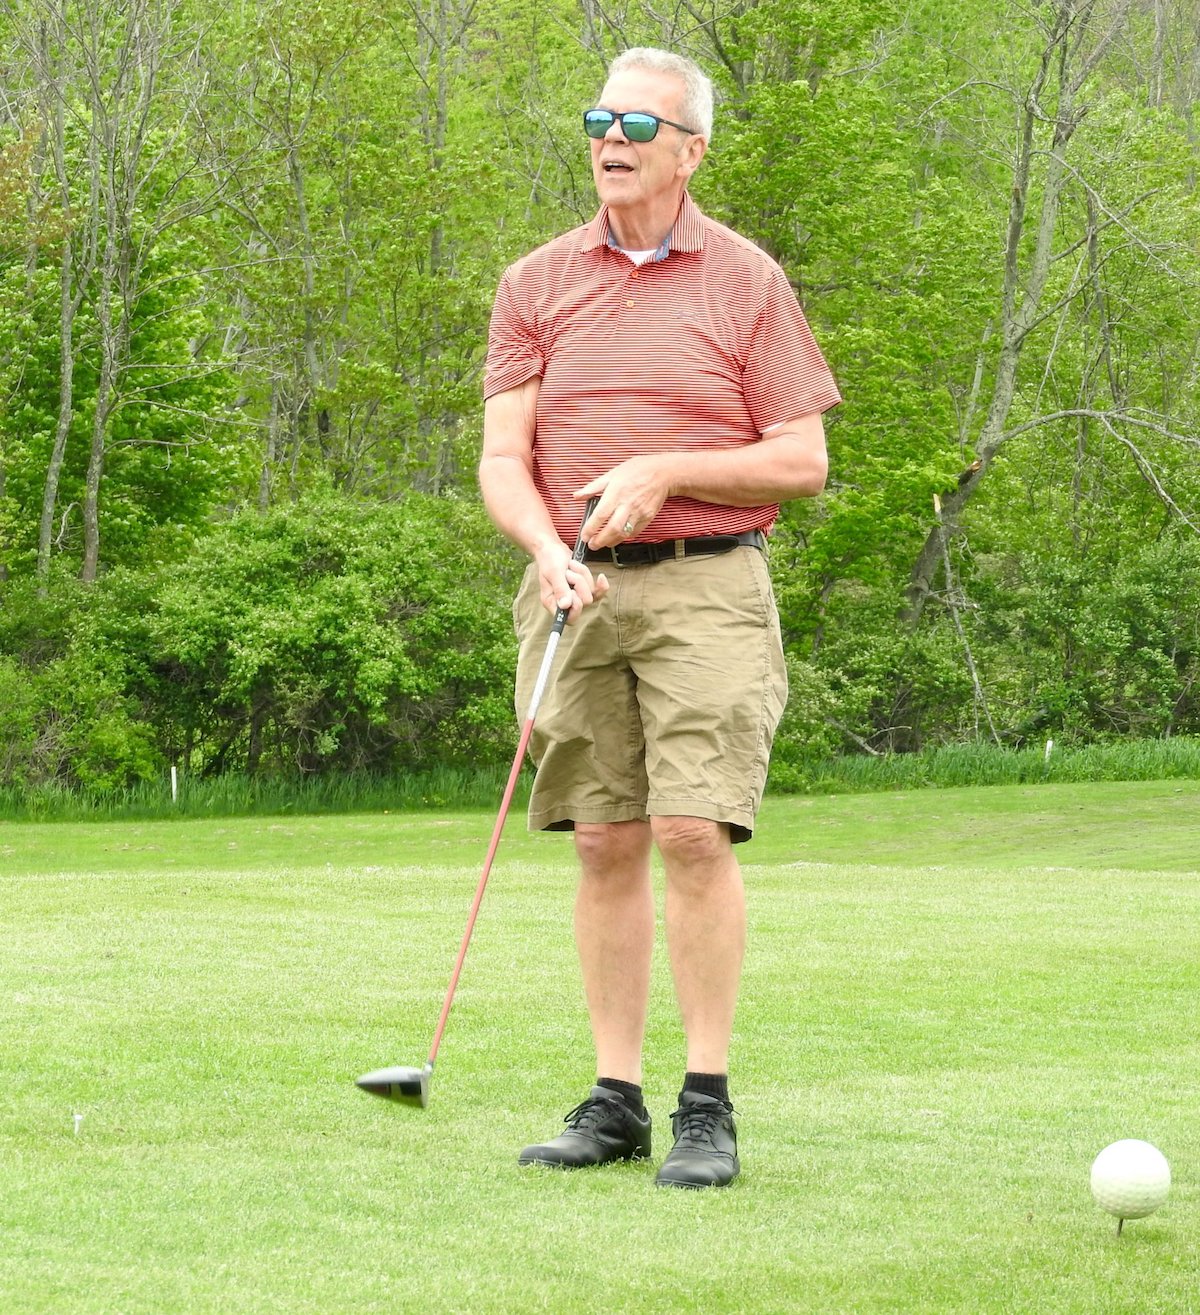 Golfers challenged during annual Chamber event